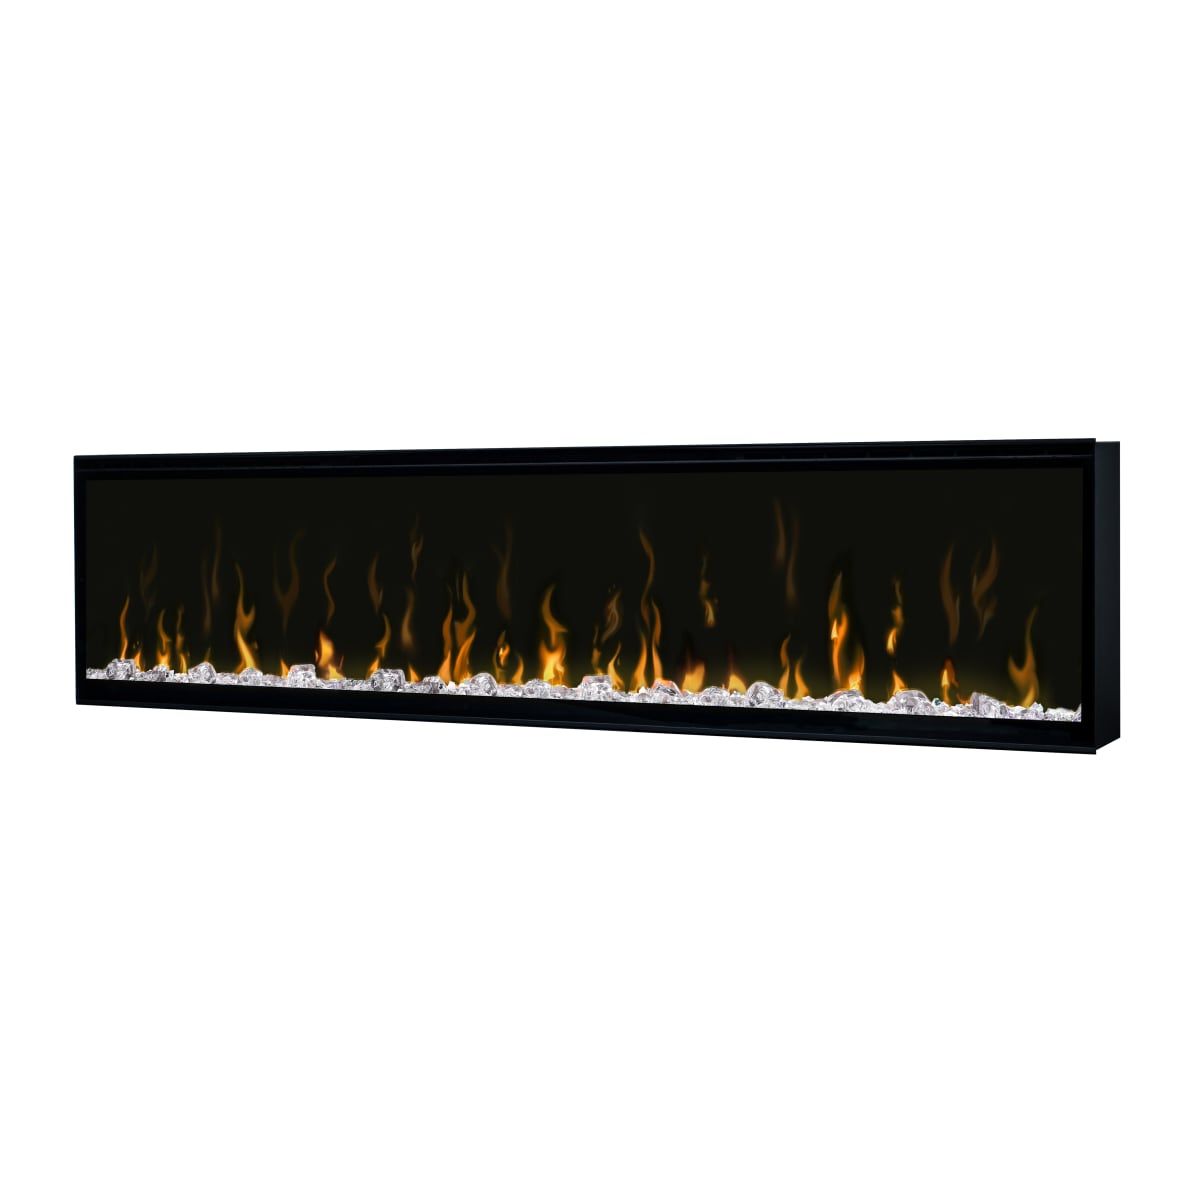 Dynasty Fireplaces Unique Warm House Vwwf Valencia Widescreen Wall Mounted